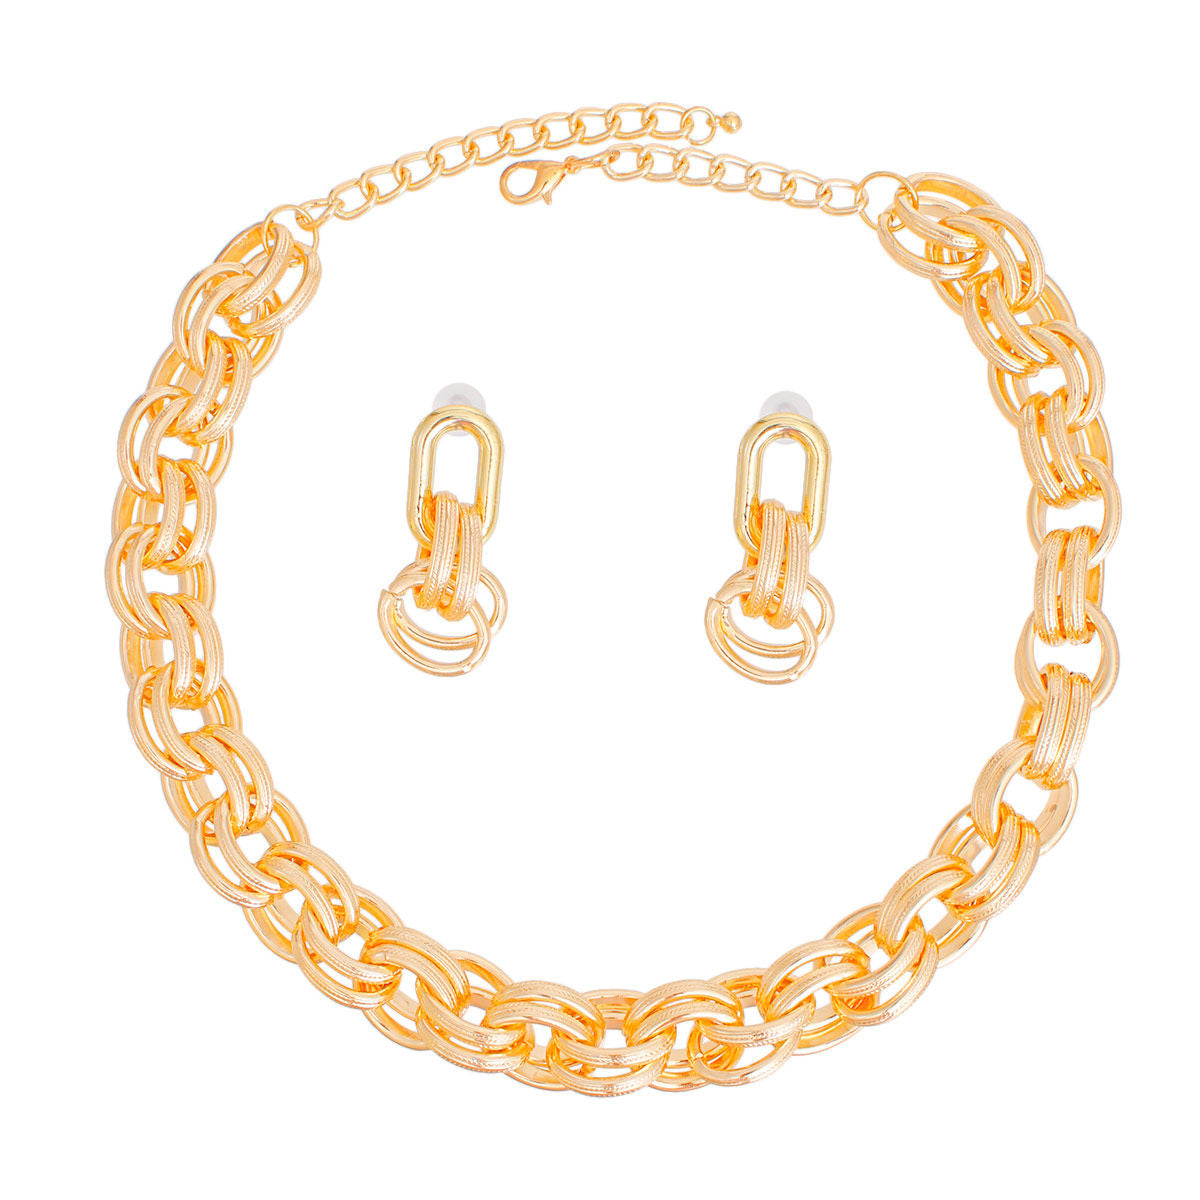 Chain Necklace Gold Double Oval Link Set for Women